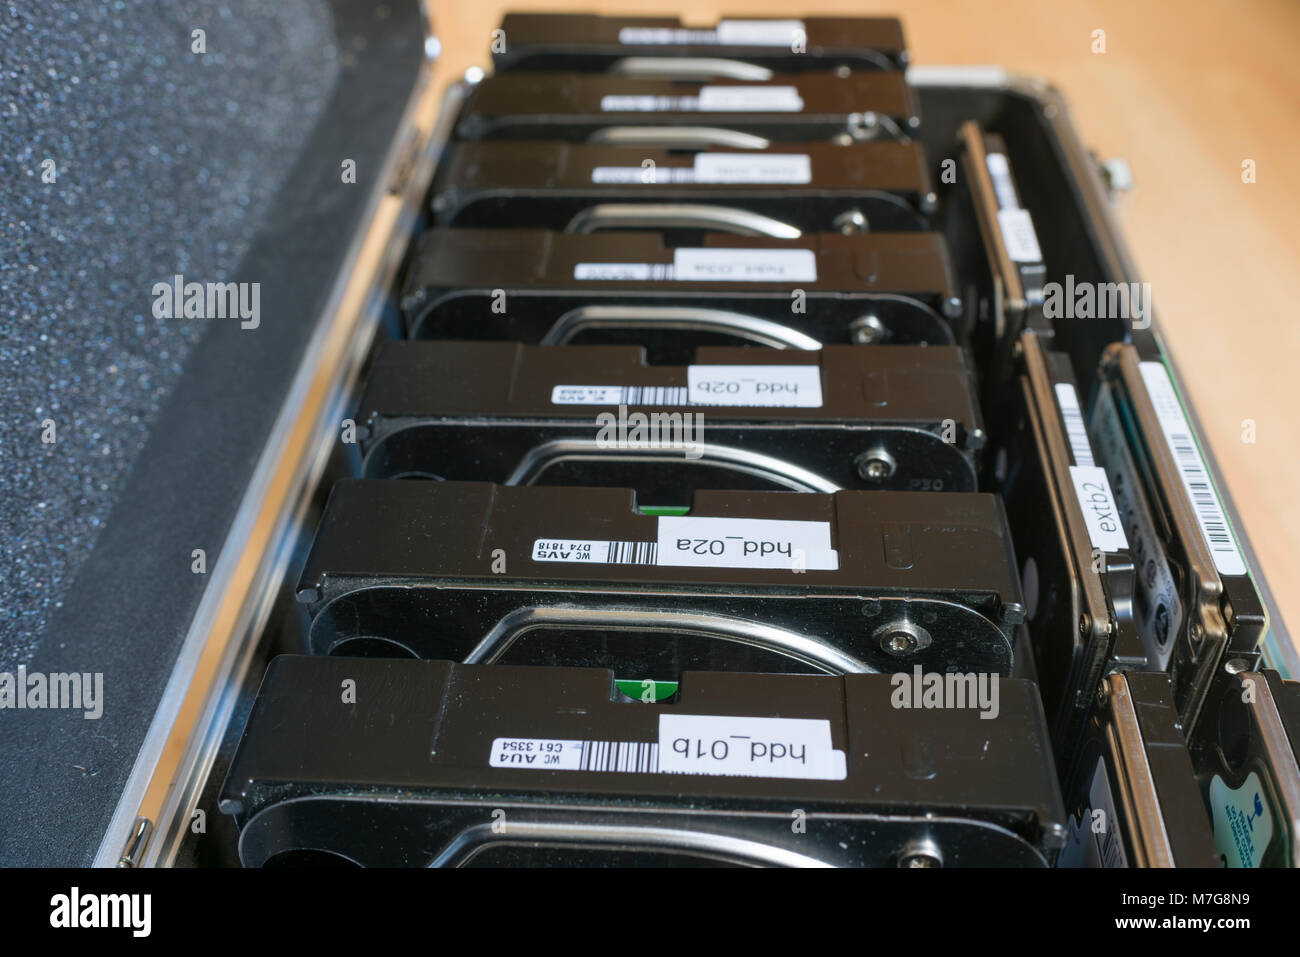 3.5 and 2.5 inch computer backup hard disks in an aluminium storage case. Stock Photo